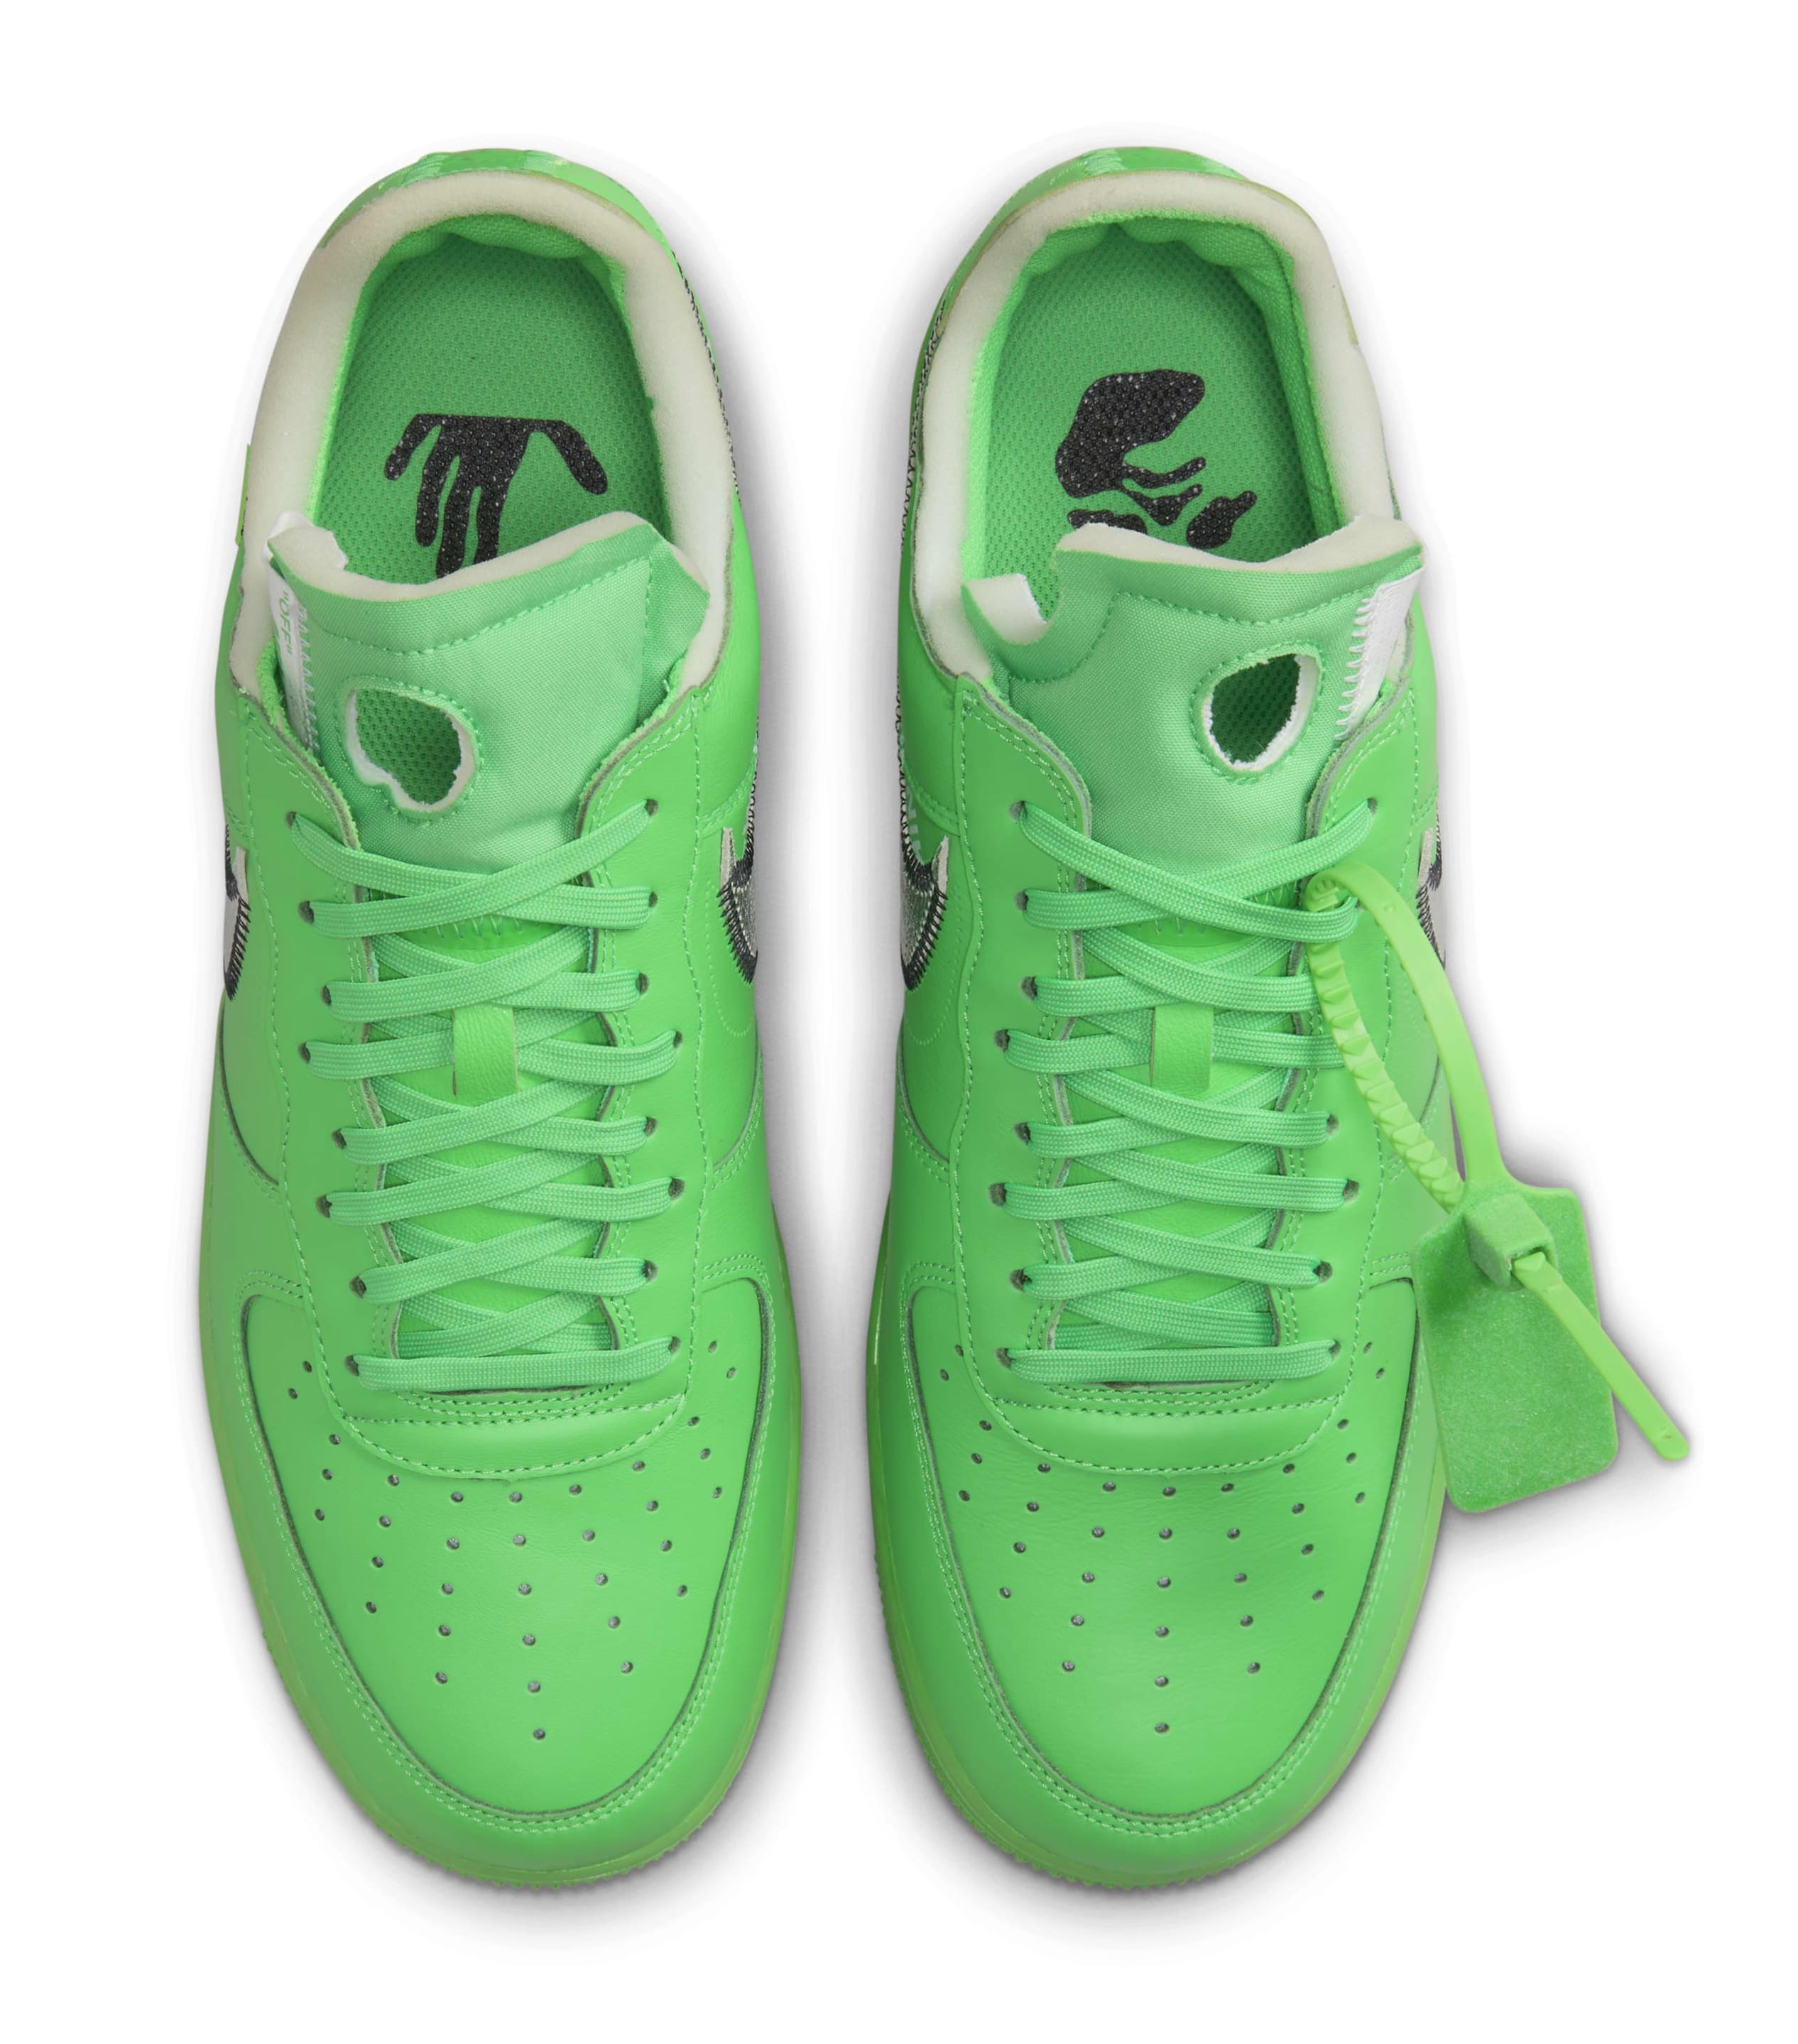 Off-White x Nike Air Force 1 Low 'Green Spark'